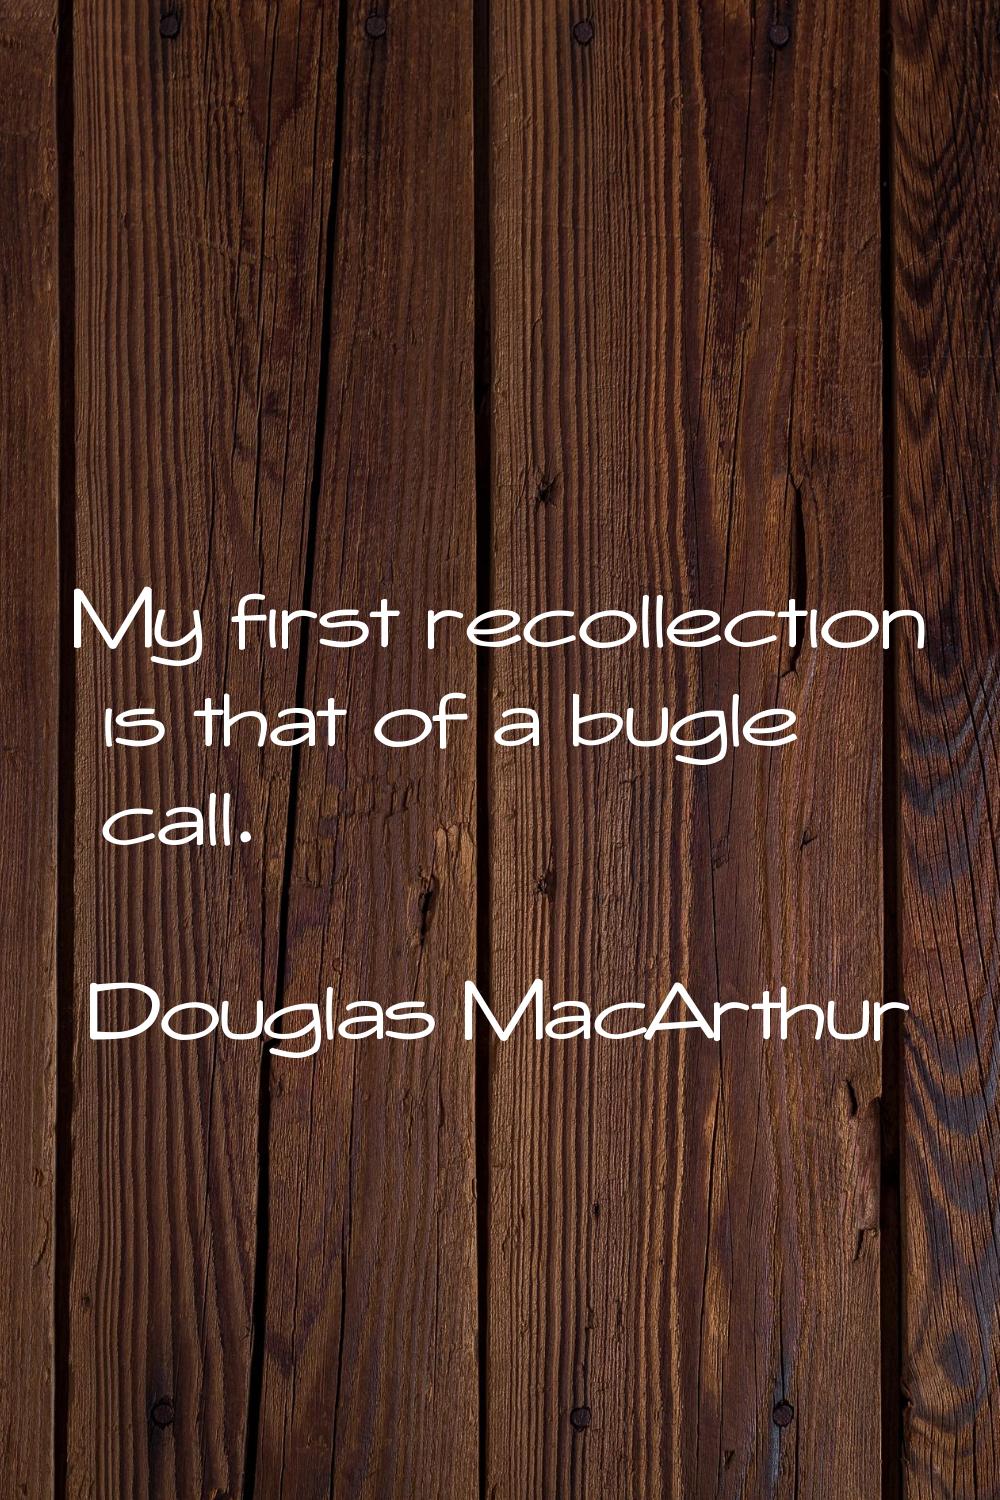 My first recollection is that of a bugle call.